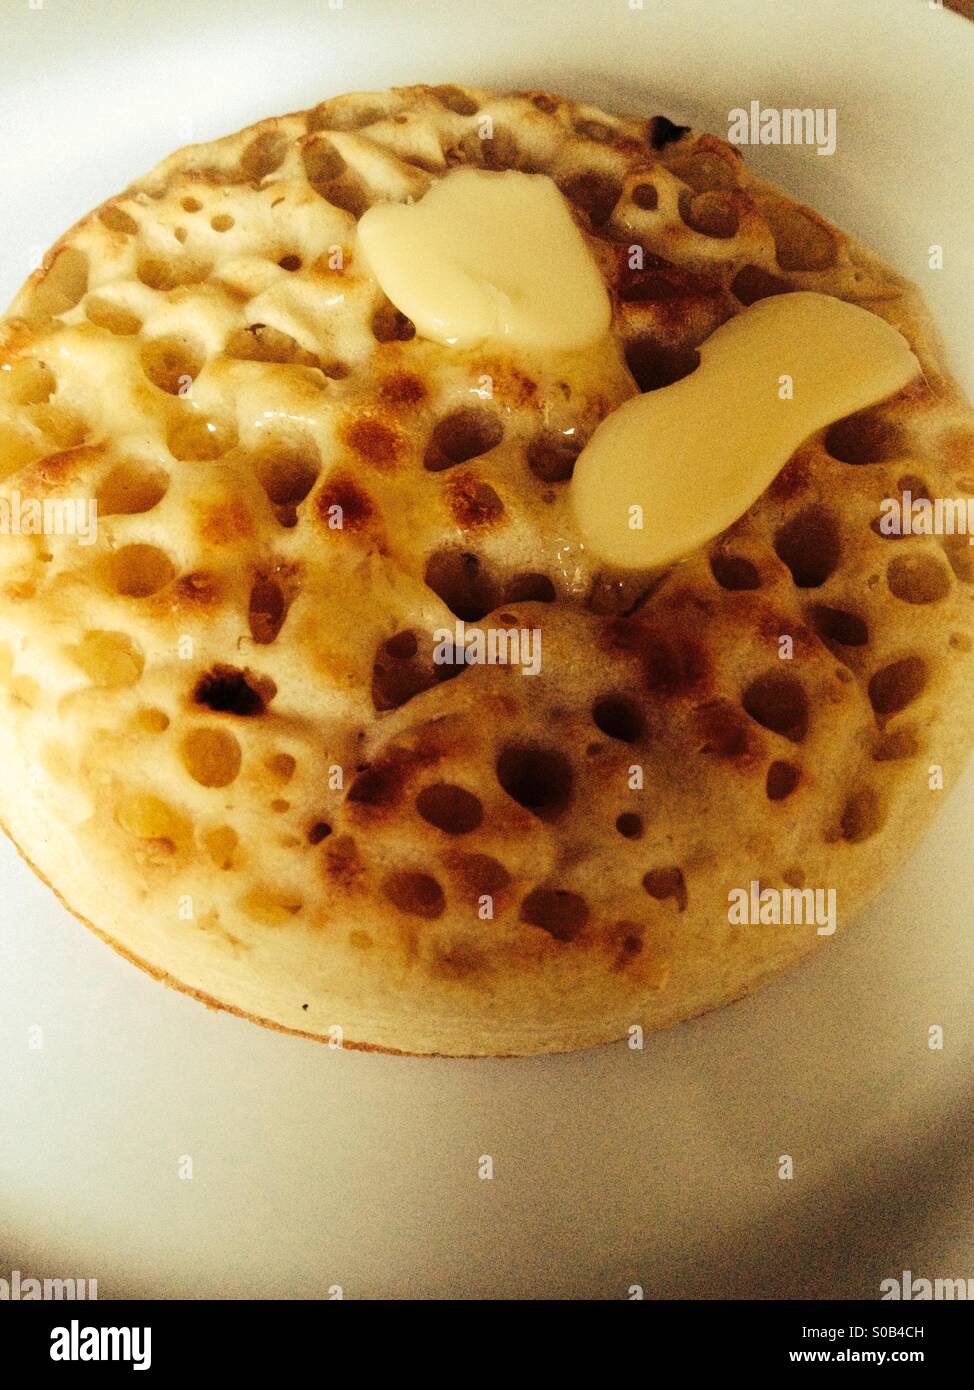 Hot buttered crumpet on a white plate Stock Photo